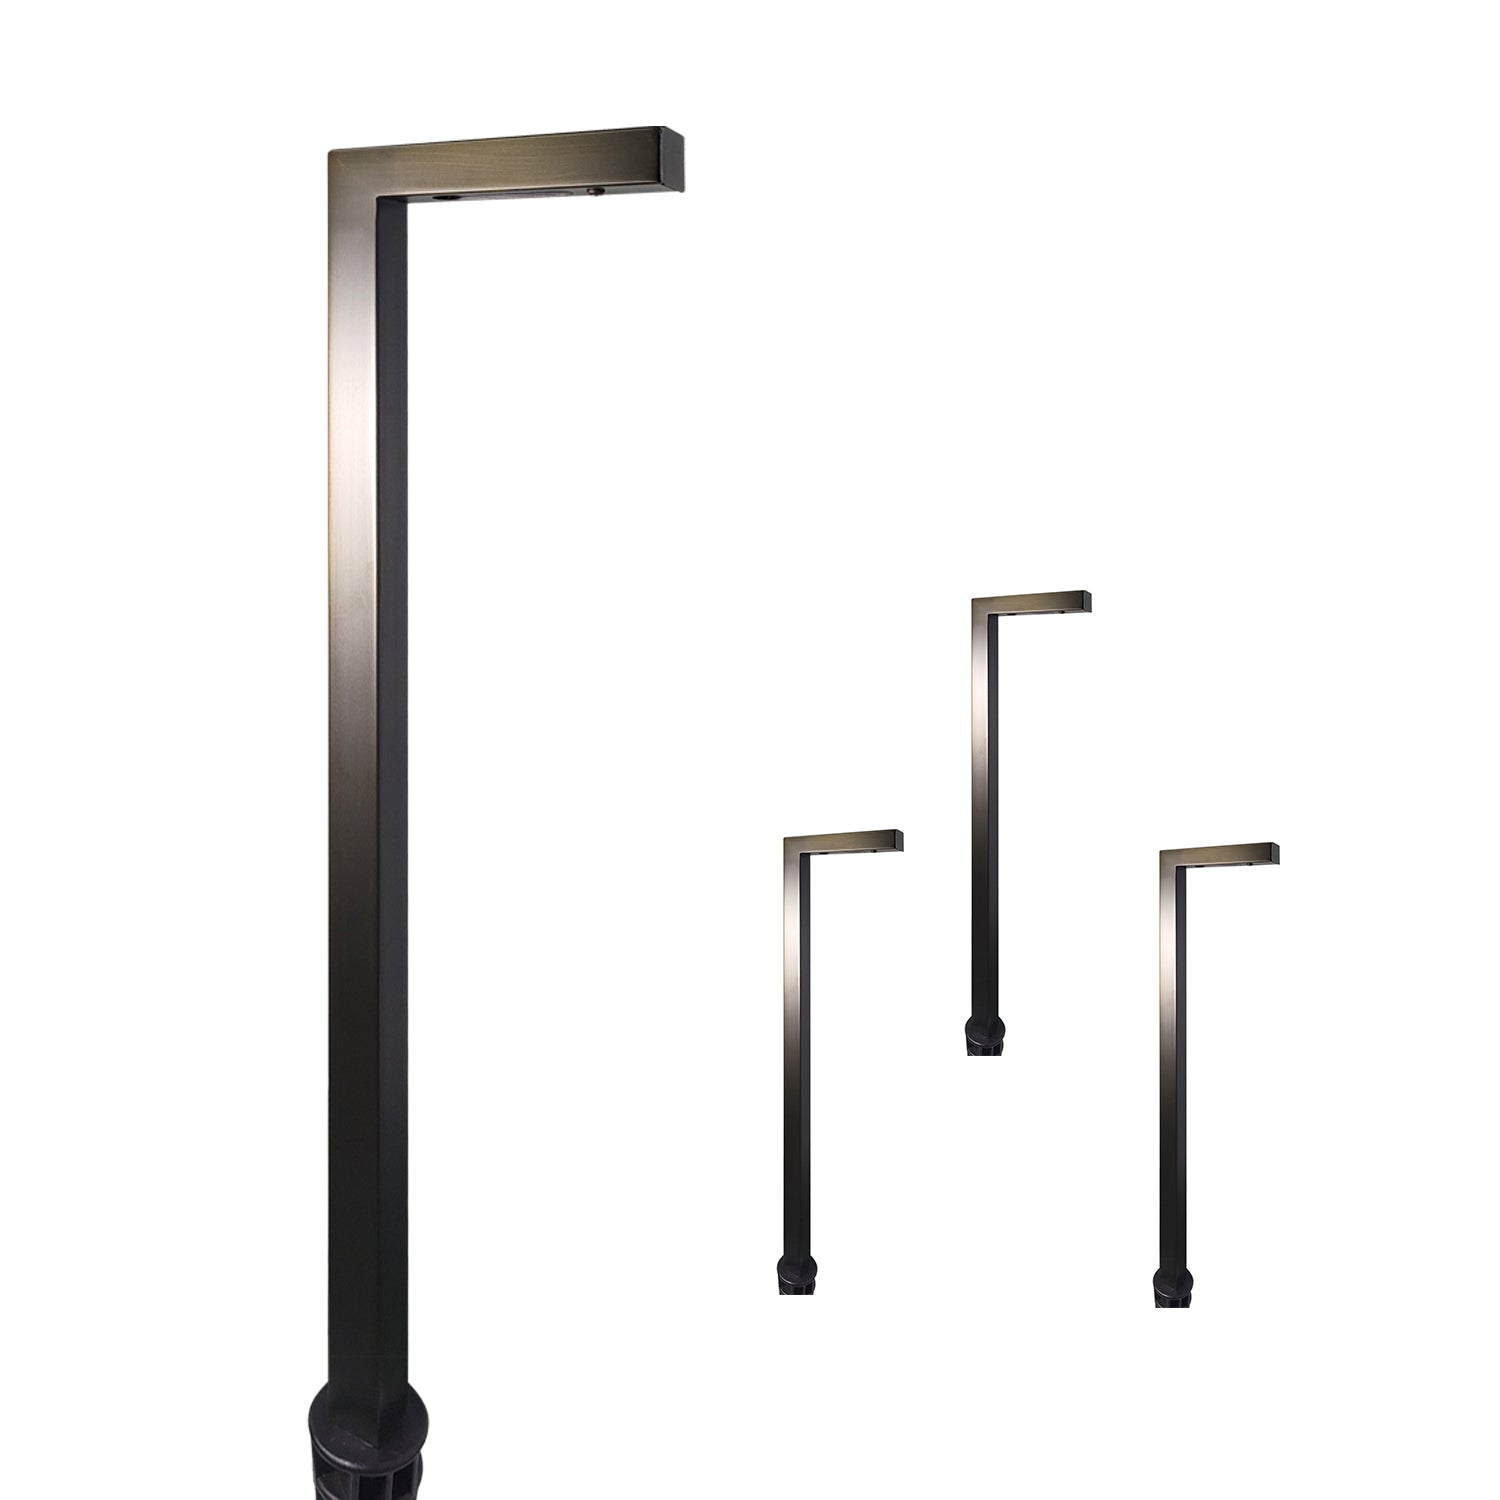 Set of solid brass low voltage outdoor pathway lights in different heights with modern design, suitable for waterproof landscape lighting